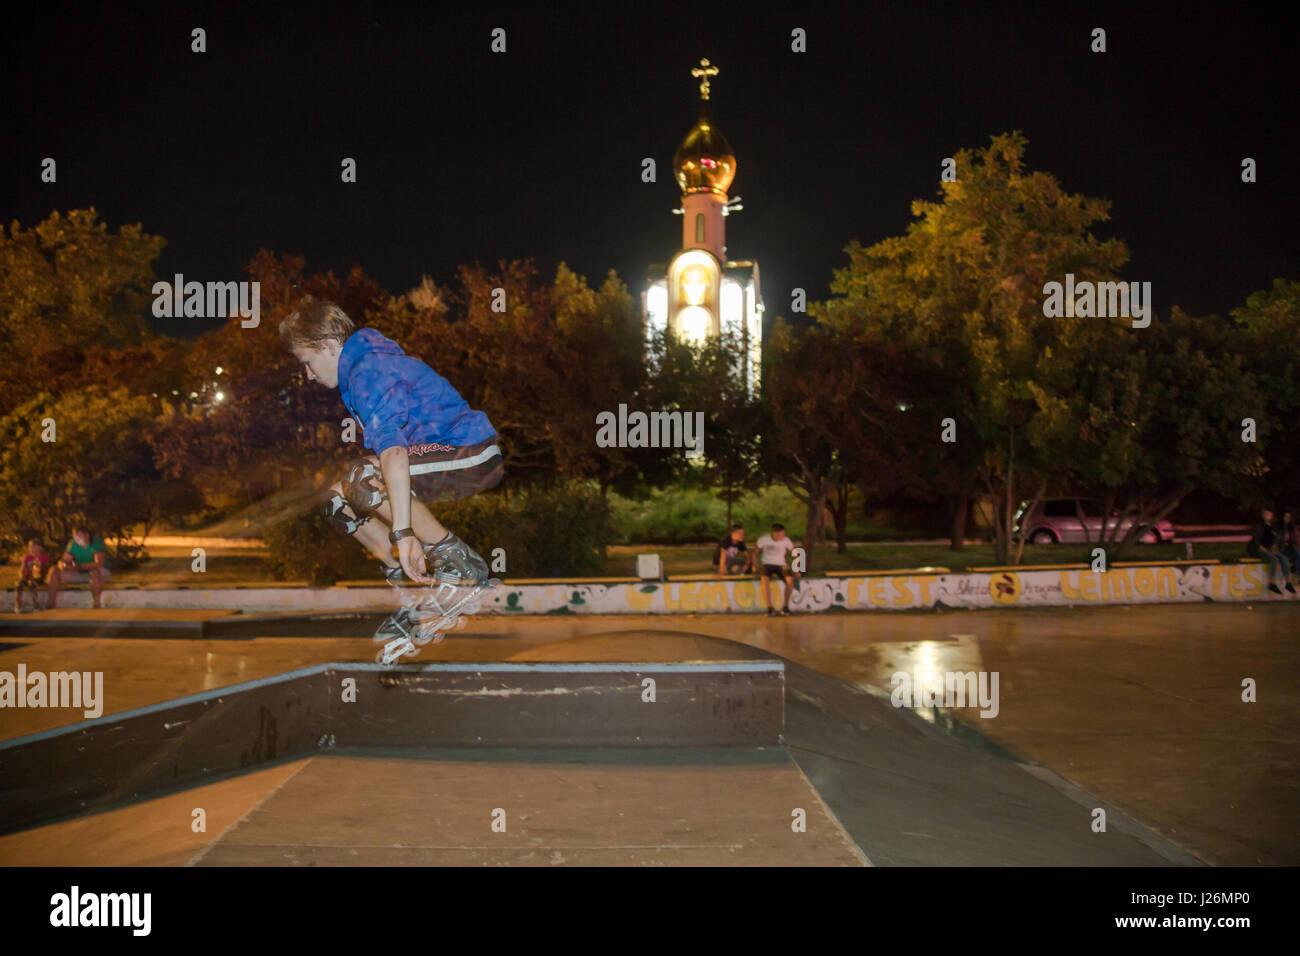 24.08.2016, Moldova, Transnistria, Tiraspol - Young skateboarder in the city center, the Georgskapelle in the background. Transnistria is a repulsive Moldovan republic under Russian influence east of the river Dnister. The region split from Moldova in 1992 and is not recognized by any other country. Even the Russian-dependent entity is known as the Transdnestrovian Moldavian Republic (Pridnestrovkaja Moldavskaja Respublika / PMR). Tiraspol is the capital. 00A160824D397CAROEX.JPG - NOT for SALE in G E R M A N Y, A U S T R I A, S W I T Z E R L A N D [MODEL RELEASE: NO, PROPERTY RELEASE: NO (c) c Stock Photo